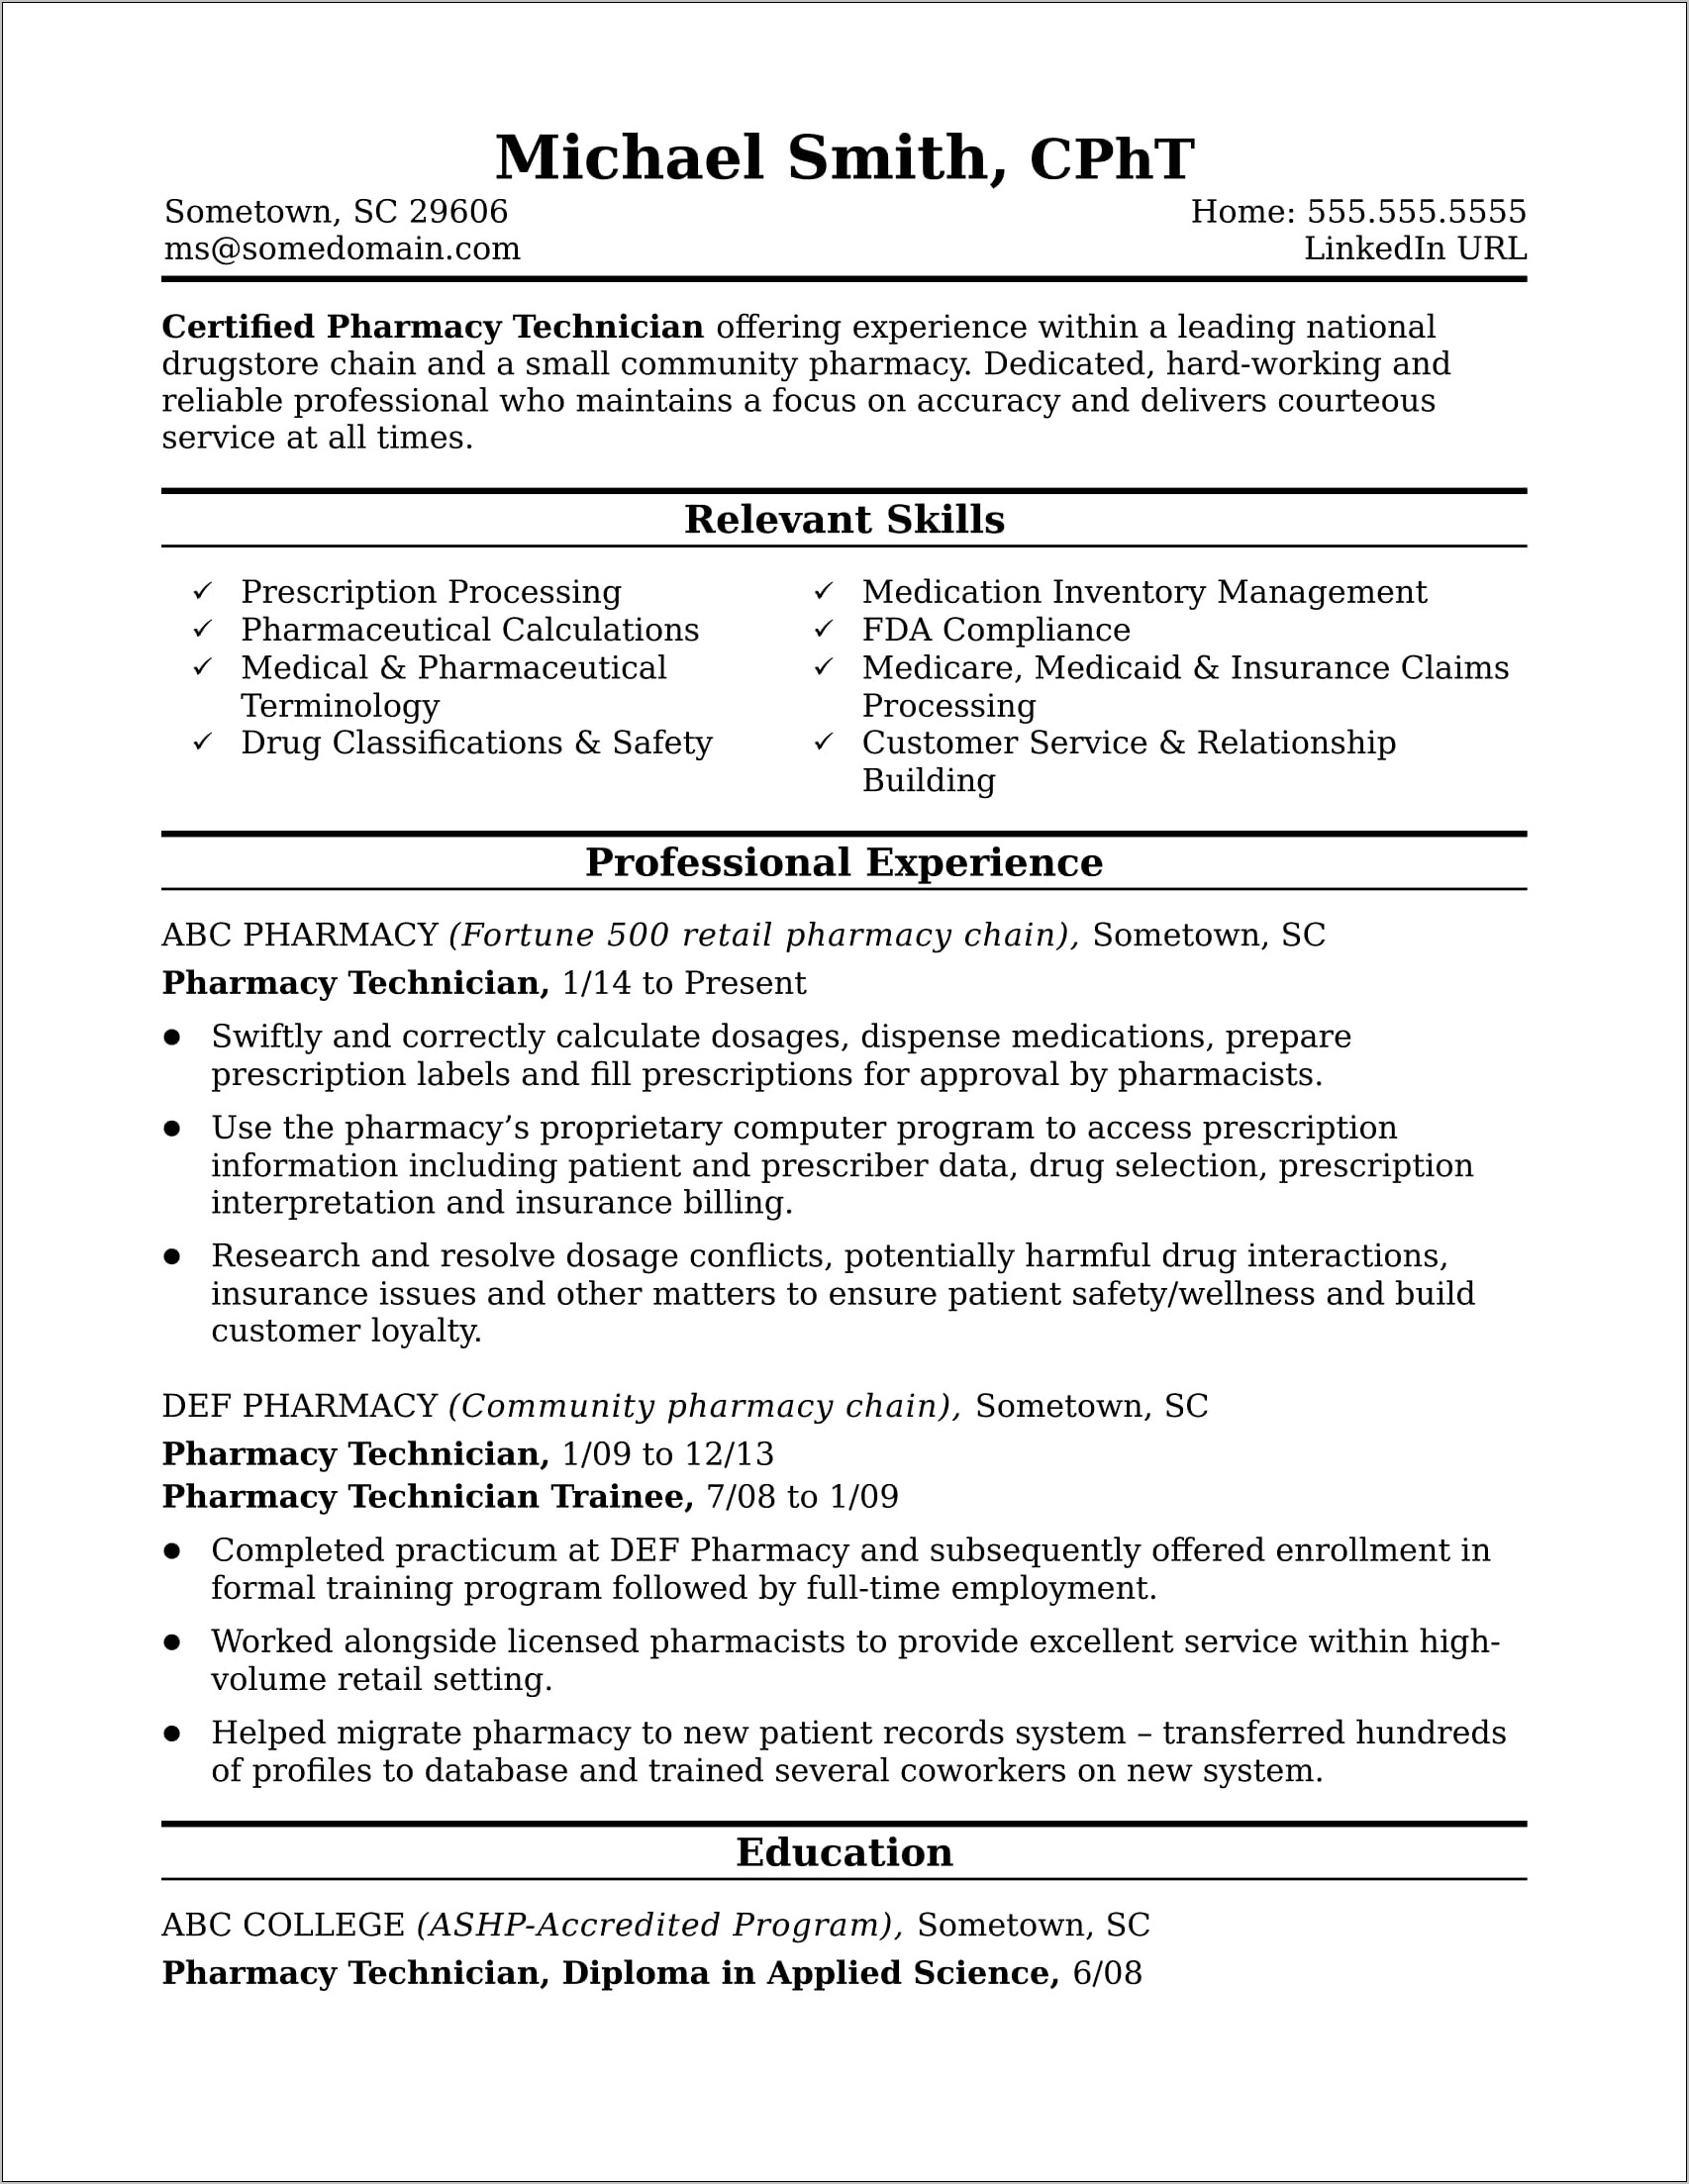 Resume Objective For Management Position Without Experience